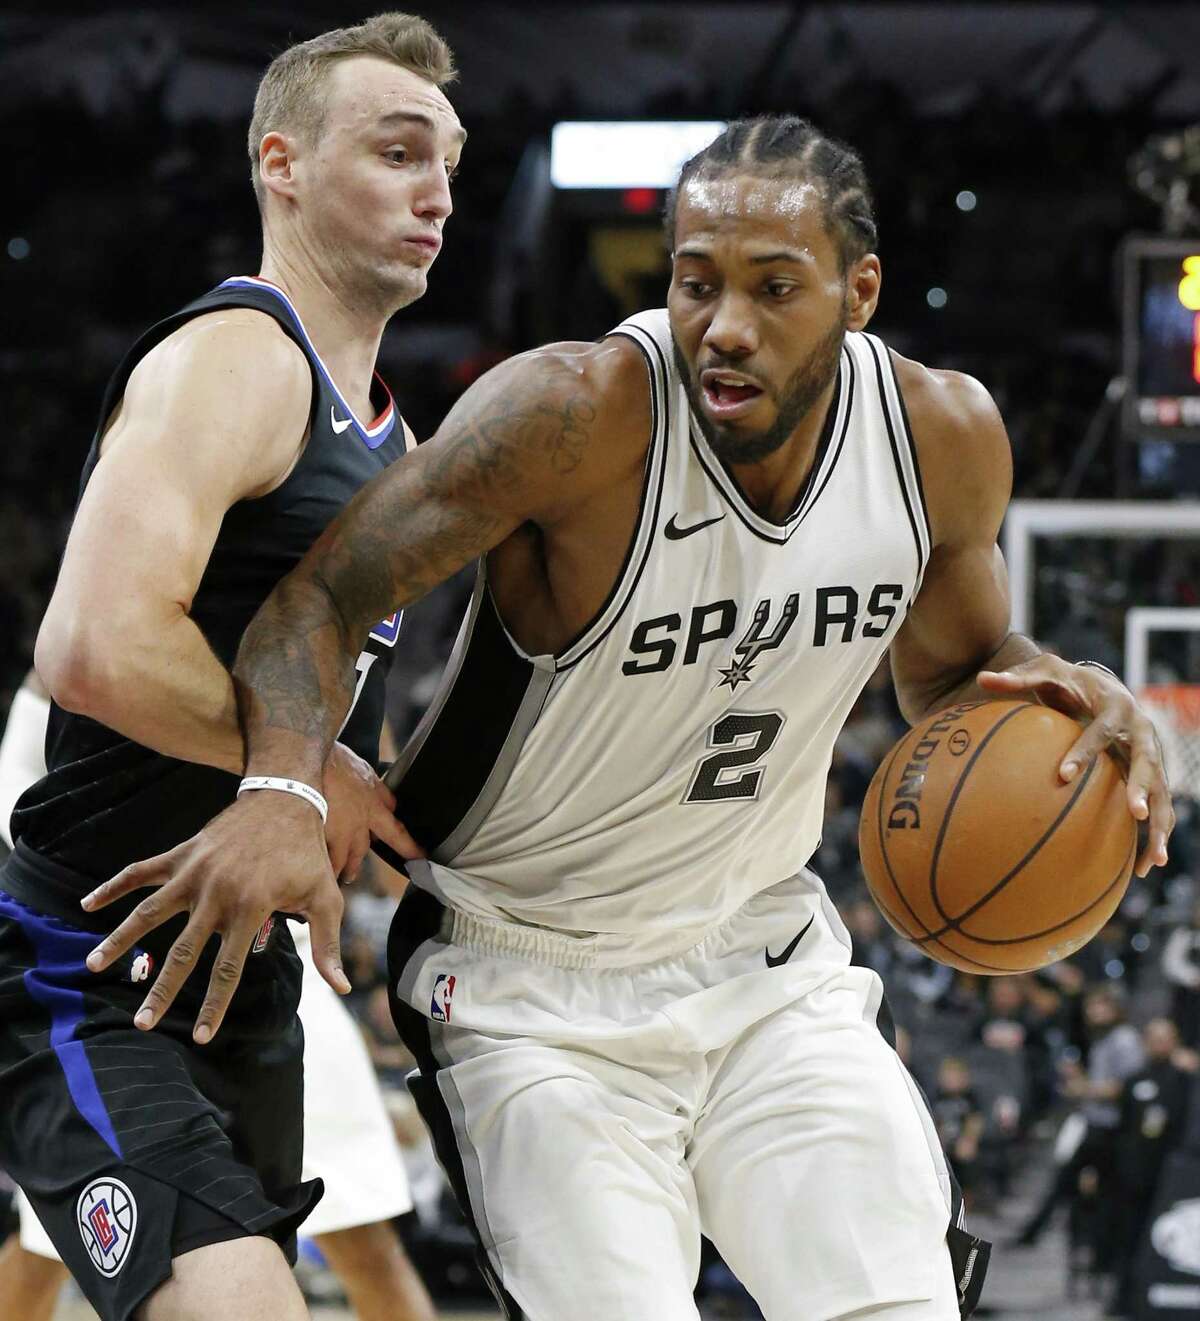 Kawhi Leonard is still rounding into form after missing nearly two months of the season.